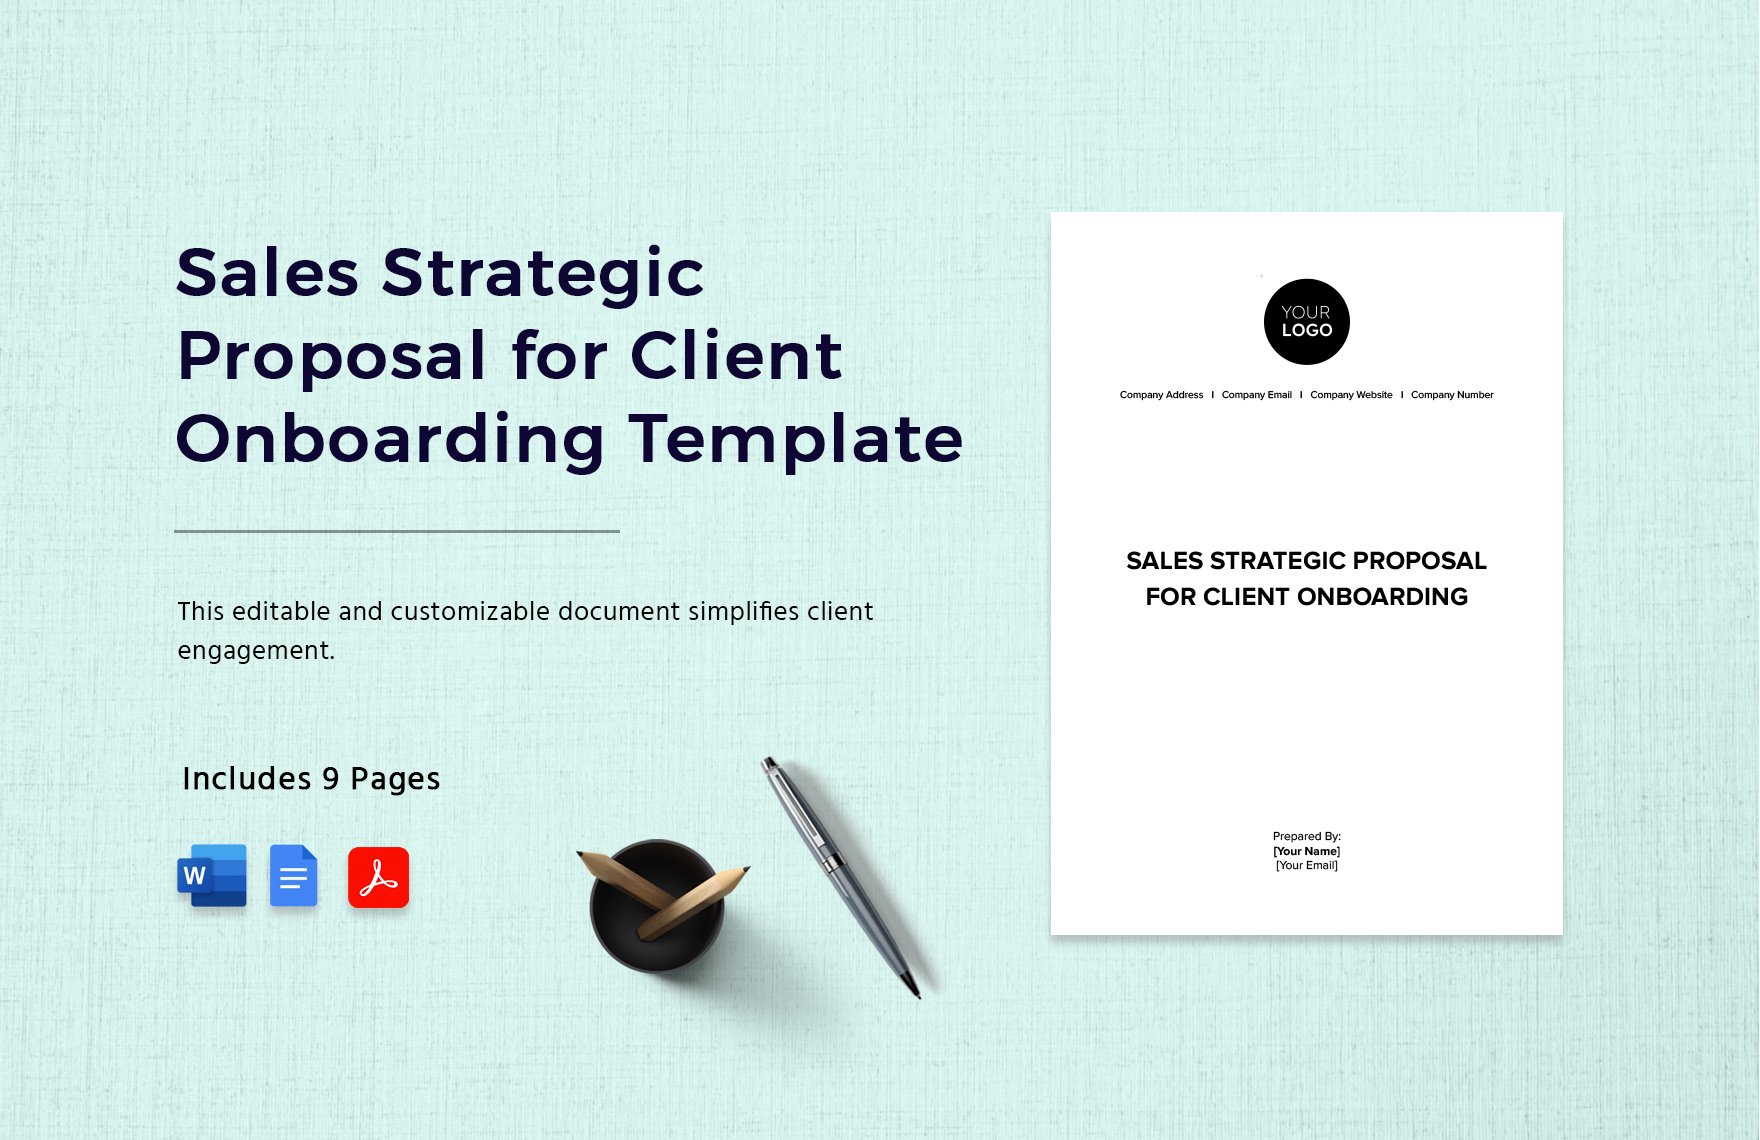 Sales Strategic Proposal for Client Onboarding Template